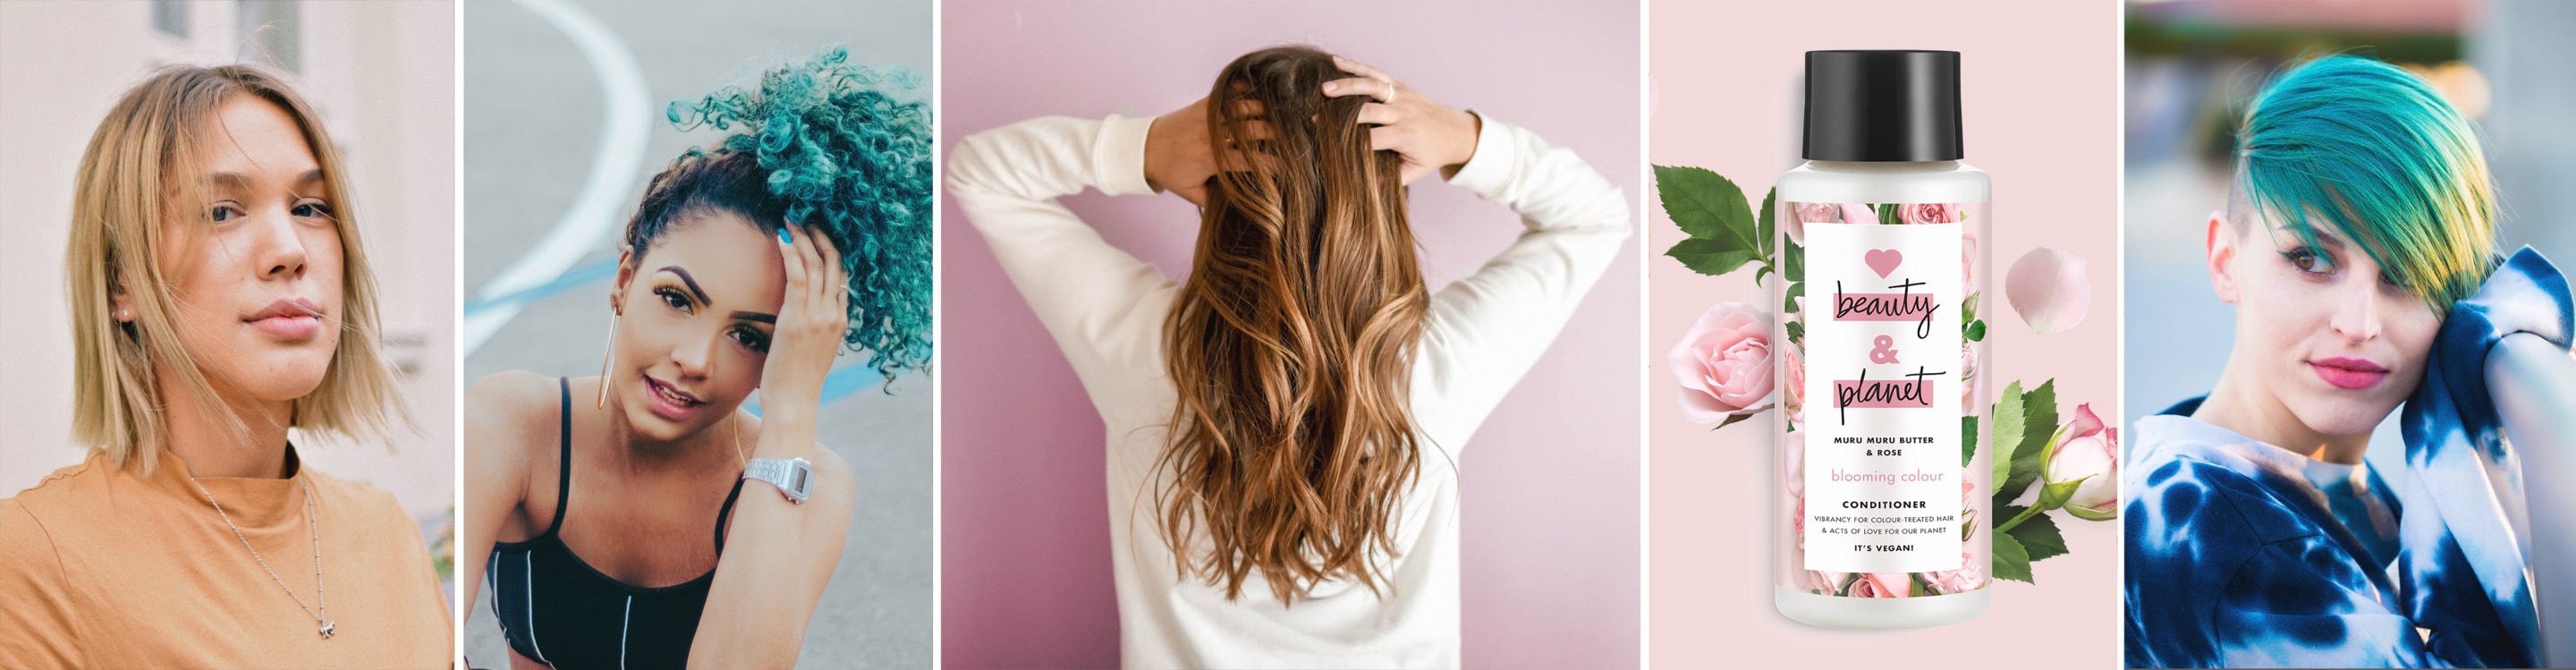 Balayage vs ombre hairstyles: Header Image of Woman with Wavy Hair and Love Beauty and Planet Conditioner